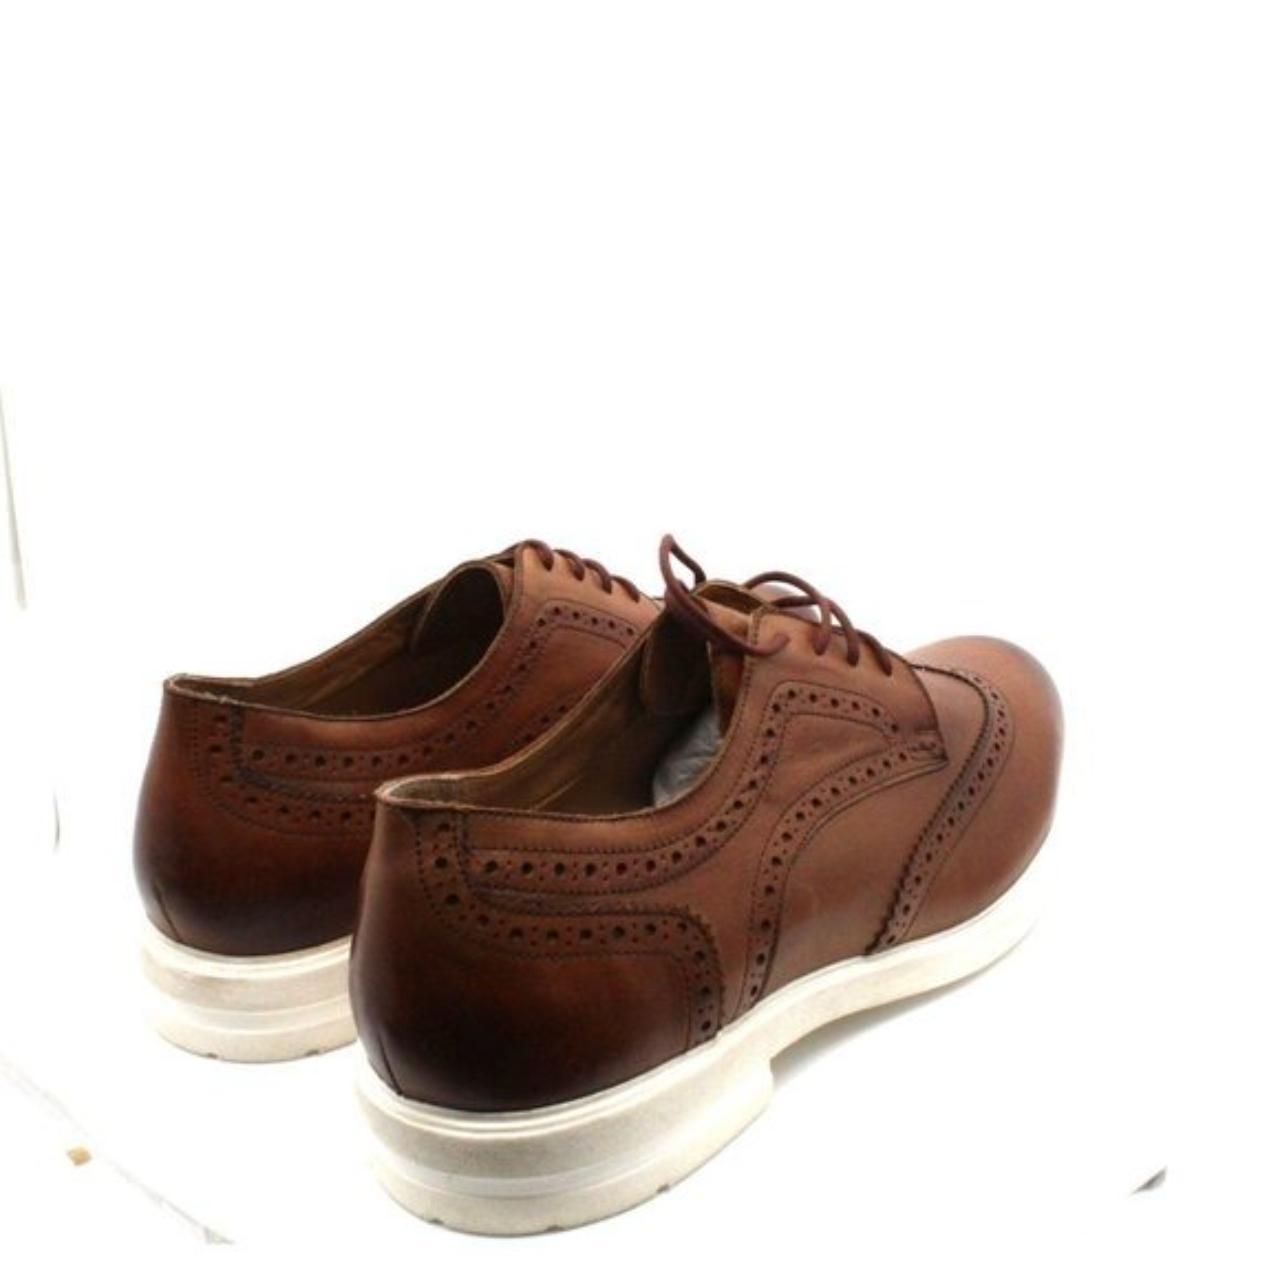 Product Image 2 - The harrison hybrid wingtip is